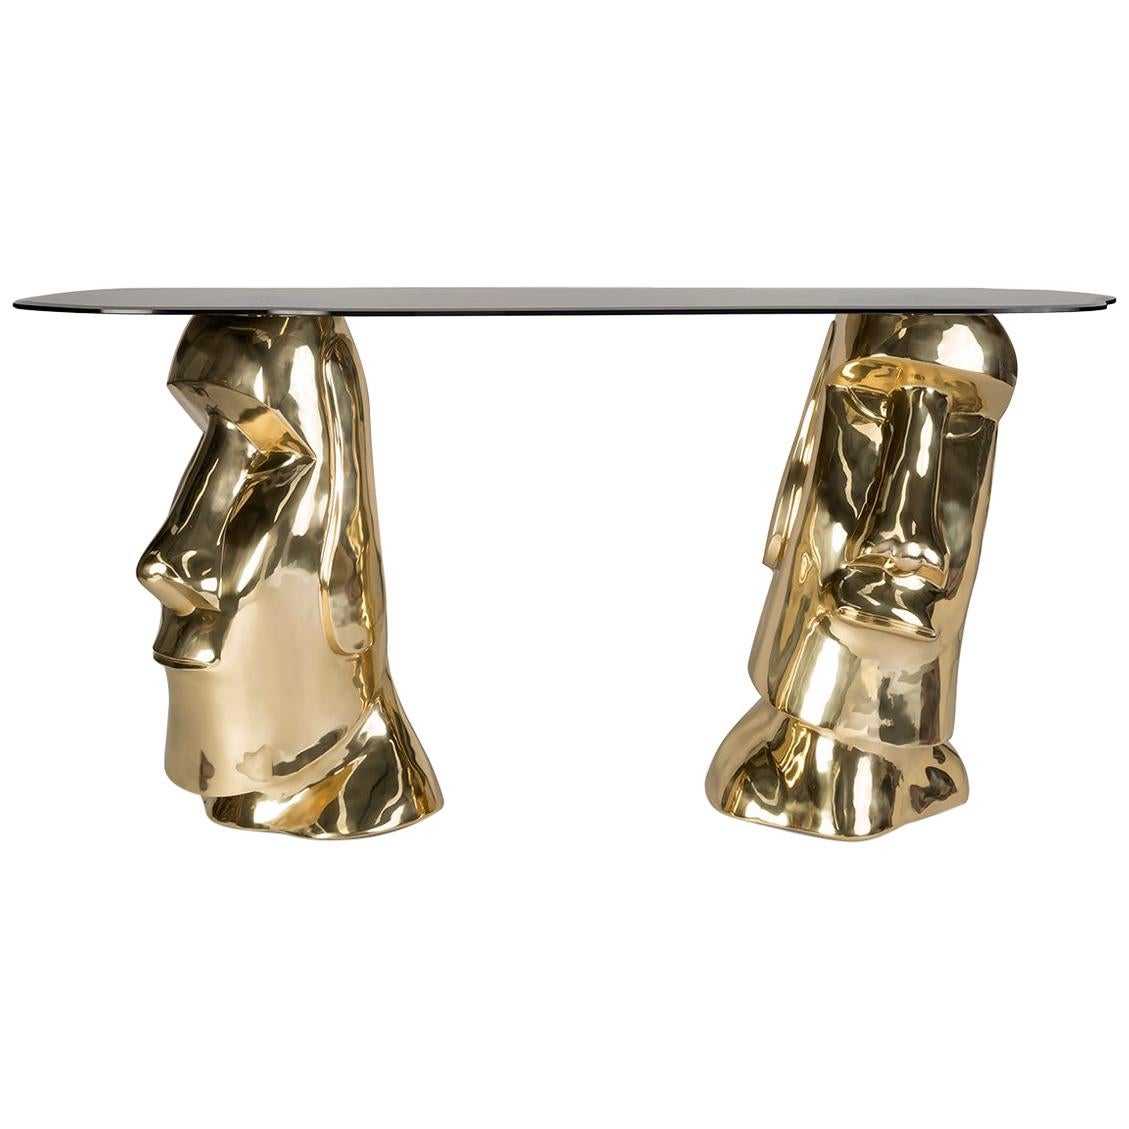 Contemporary Moai Console Table in Polished Brass Cast and Bronze Tempered Glass For Sale